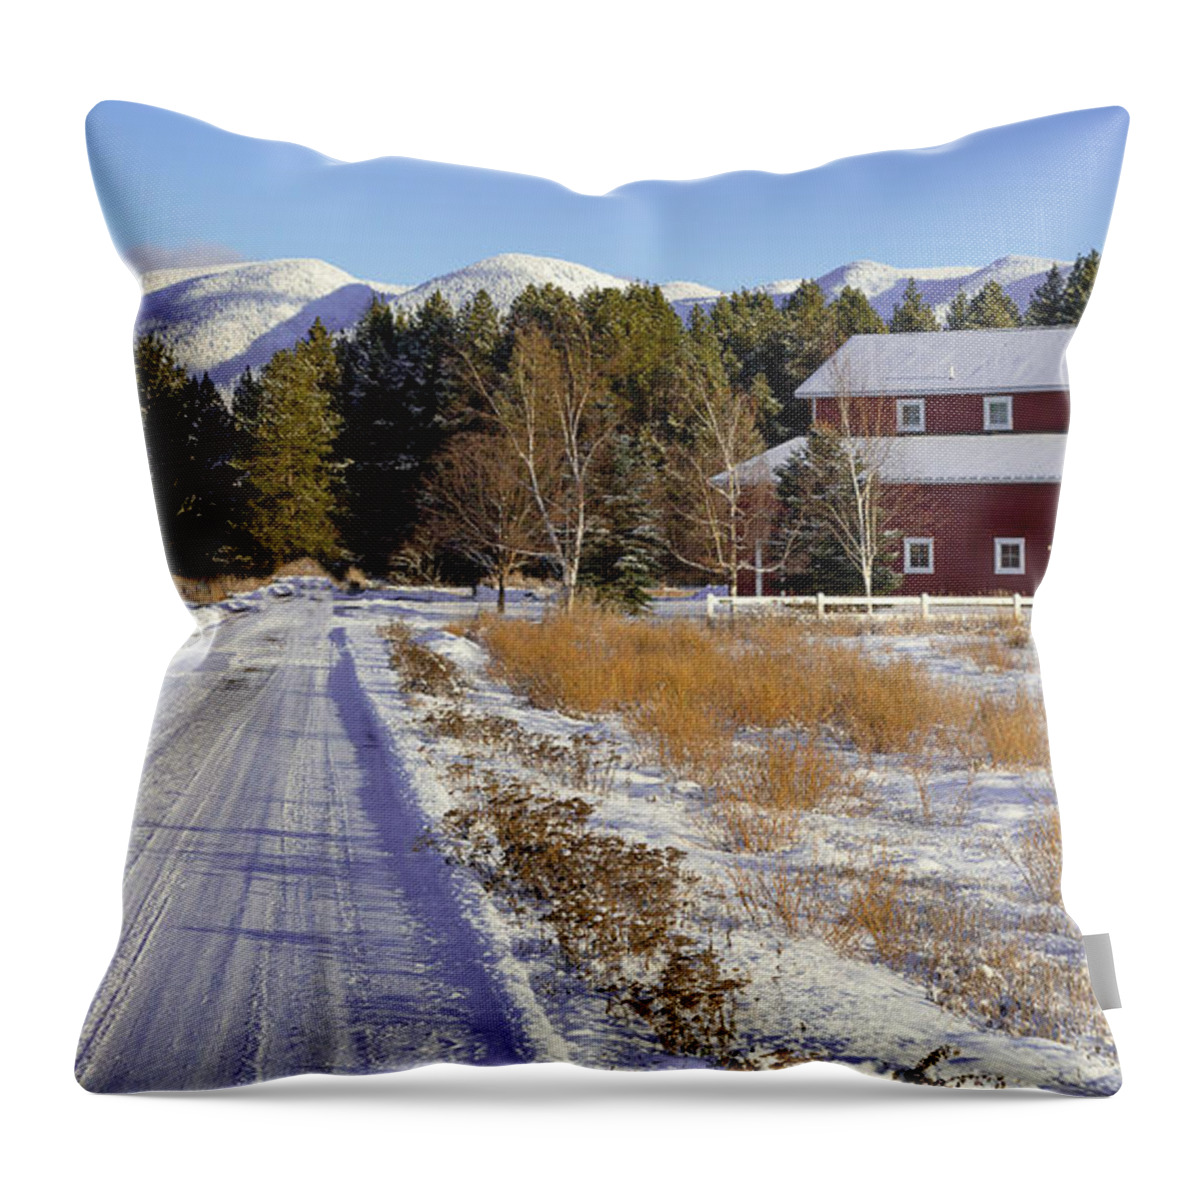 Barn Throw Pillow featuring the photograph Red Barn Scene by Jack Bell